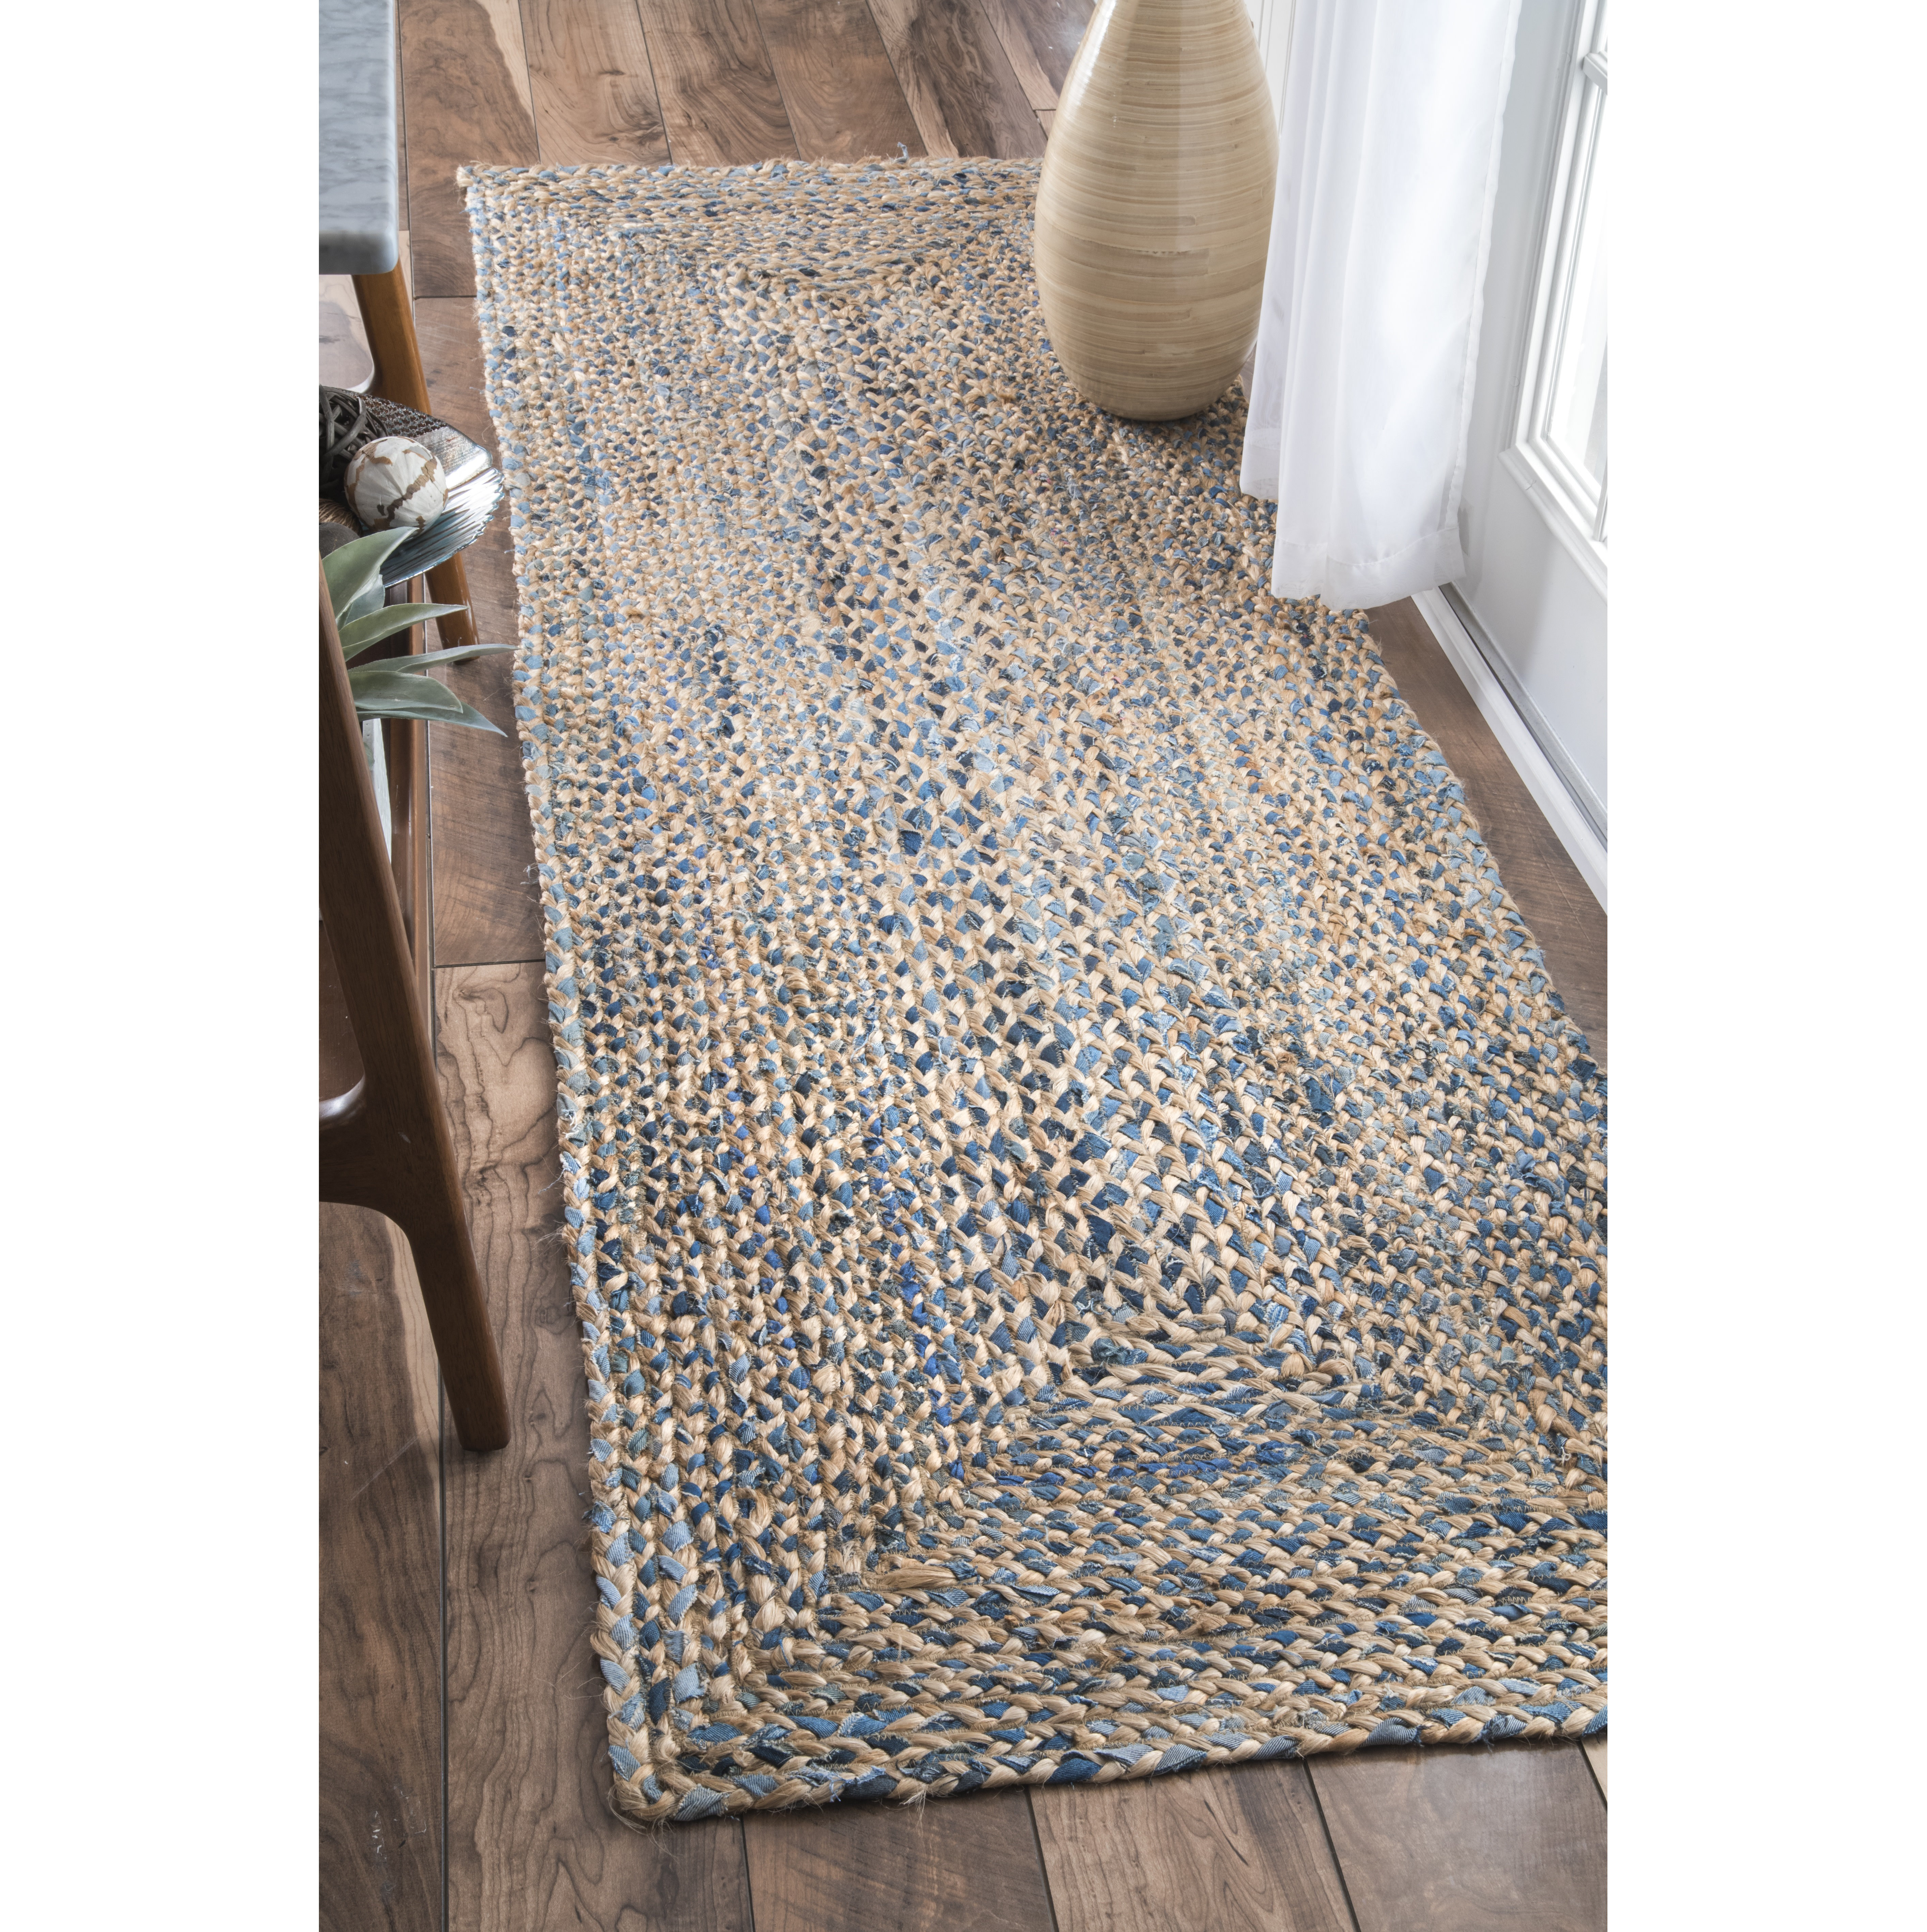 Buy Bhuvan Handloom Rectangle Jute and Denim Rug, Multi Color Braided Rug,  Hand Woven, for Living Room Bedroom, Bathroom, Kitchen, Entryways (5x7  feet) Online at Lowest Price Ever in India | Check